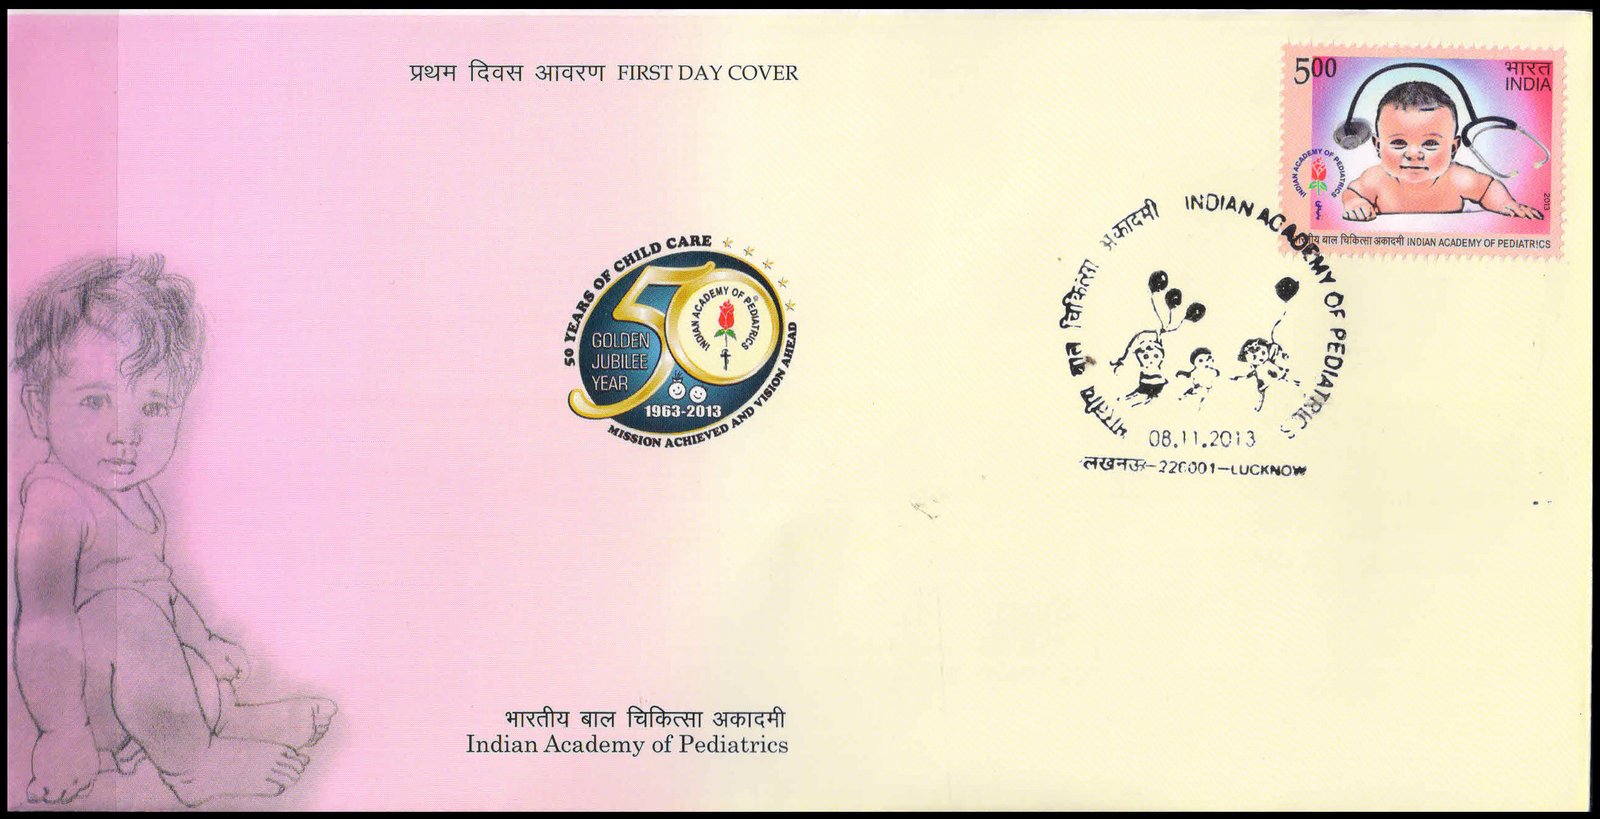 INDIA 8-11-2013, Indian Academy of Pediatrics, First Day Cover